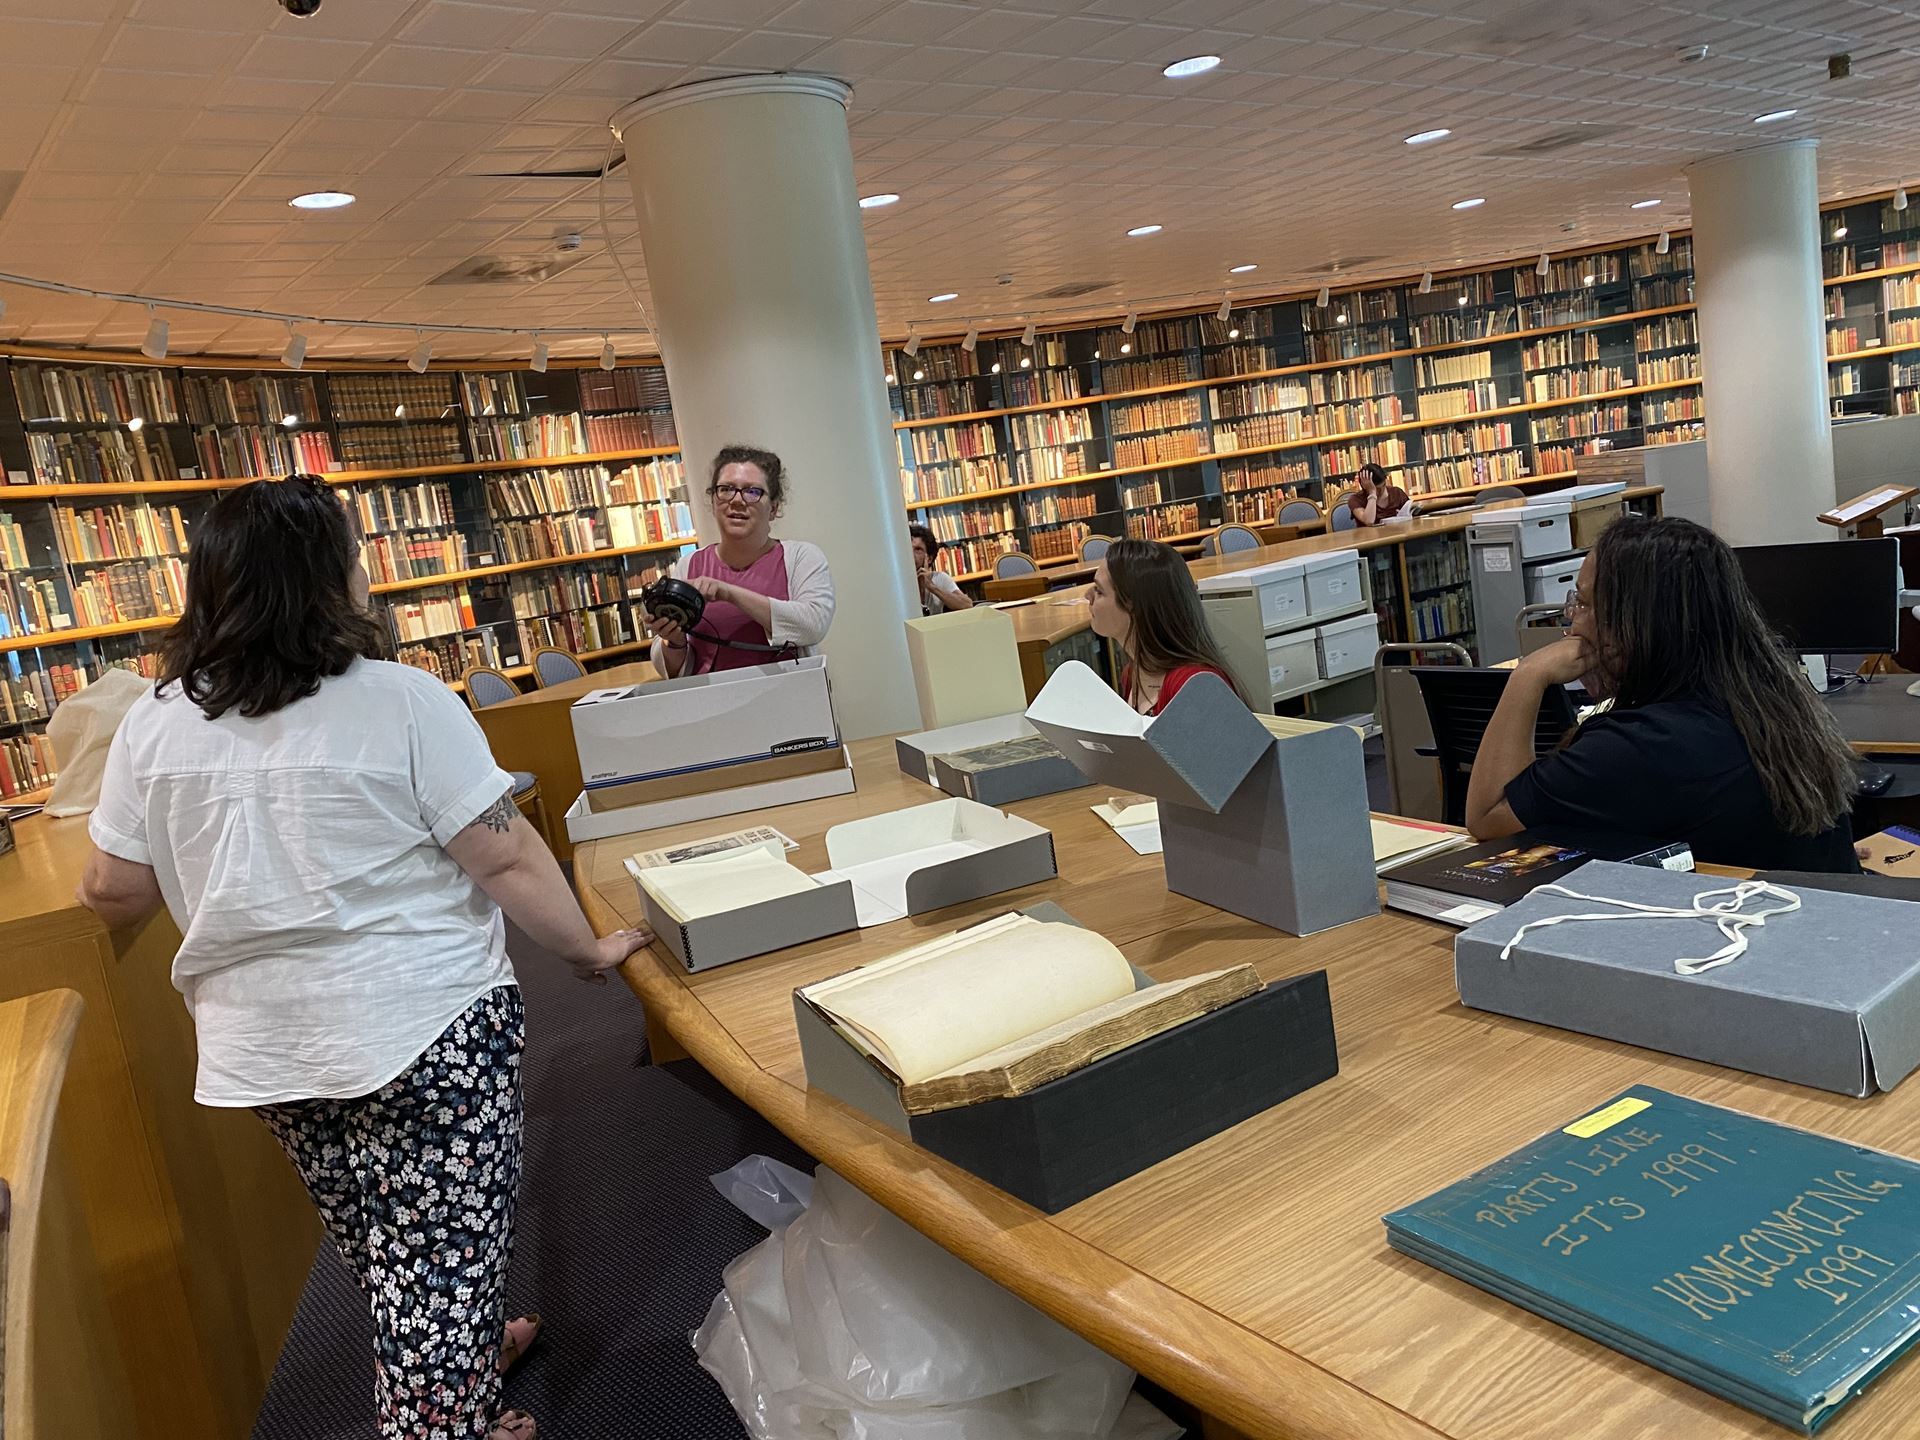 Randi Beem shows an object to a group of folks facing her in the UNCC reading room